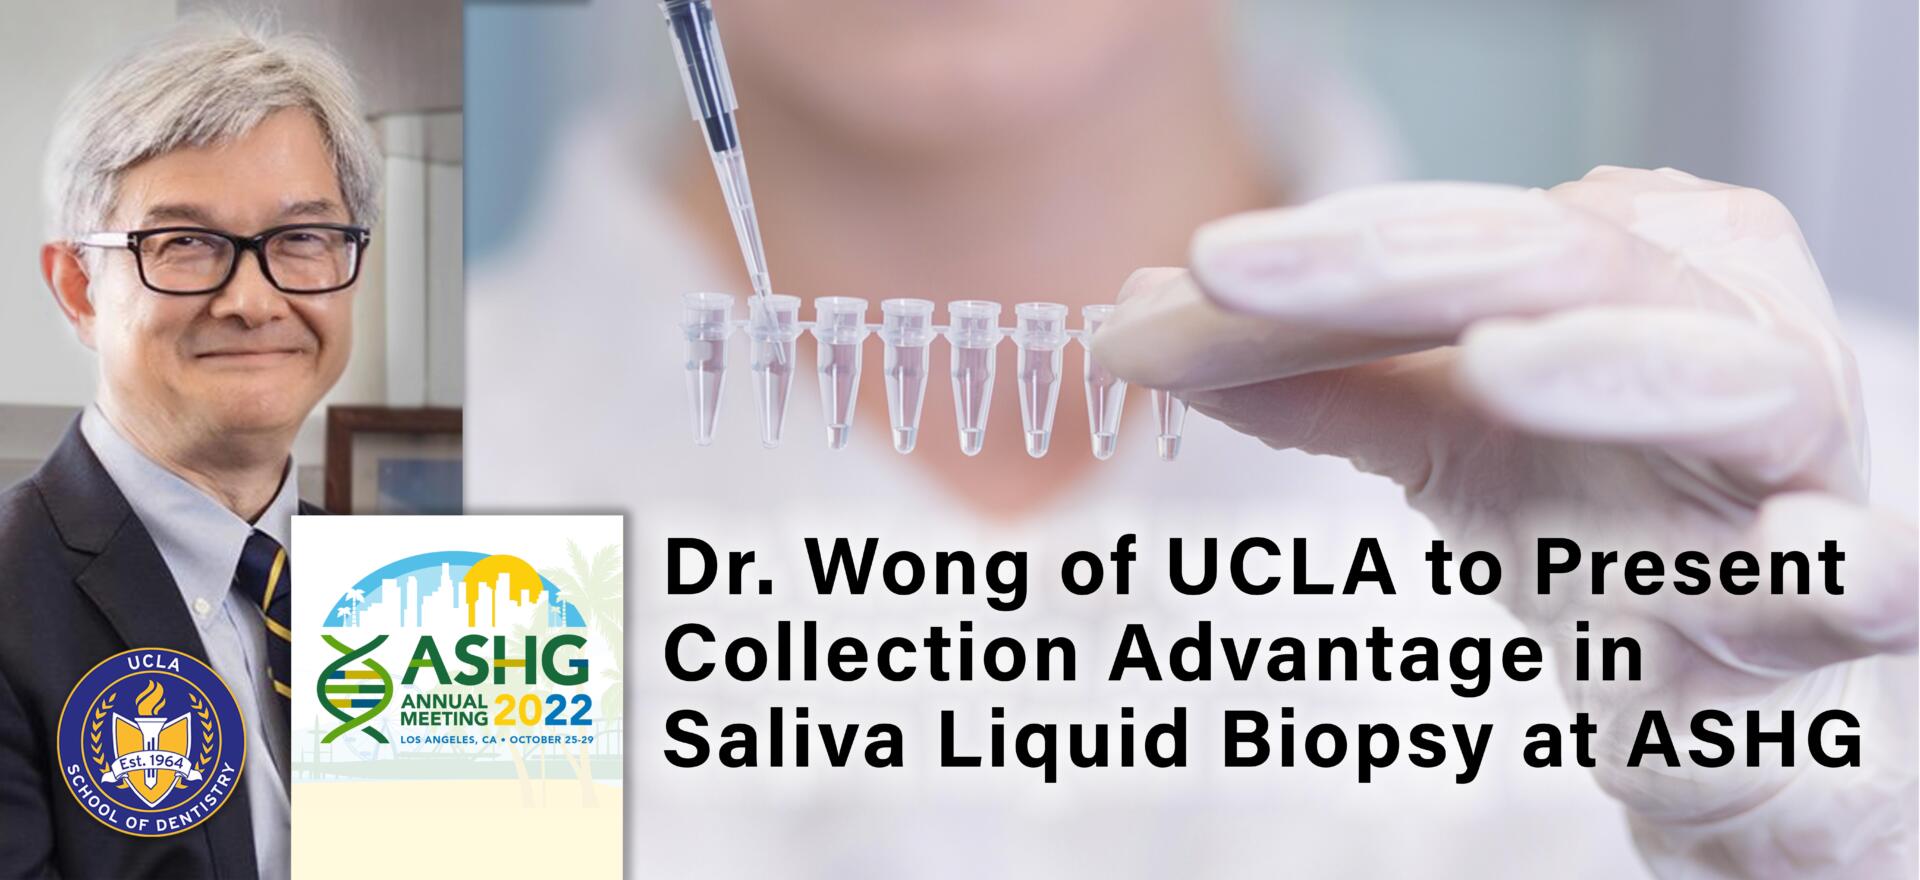 Dr. Wong of UCLA to Present Collection Advantage in Saliva Liquid Biopsy at ASHG 2022